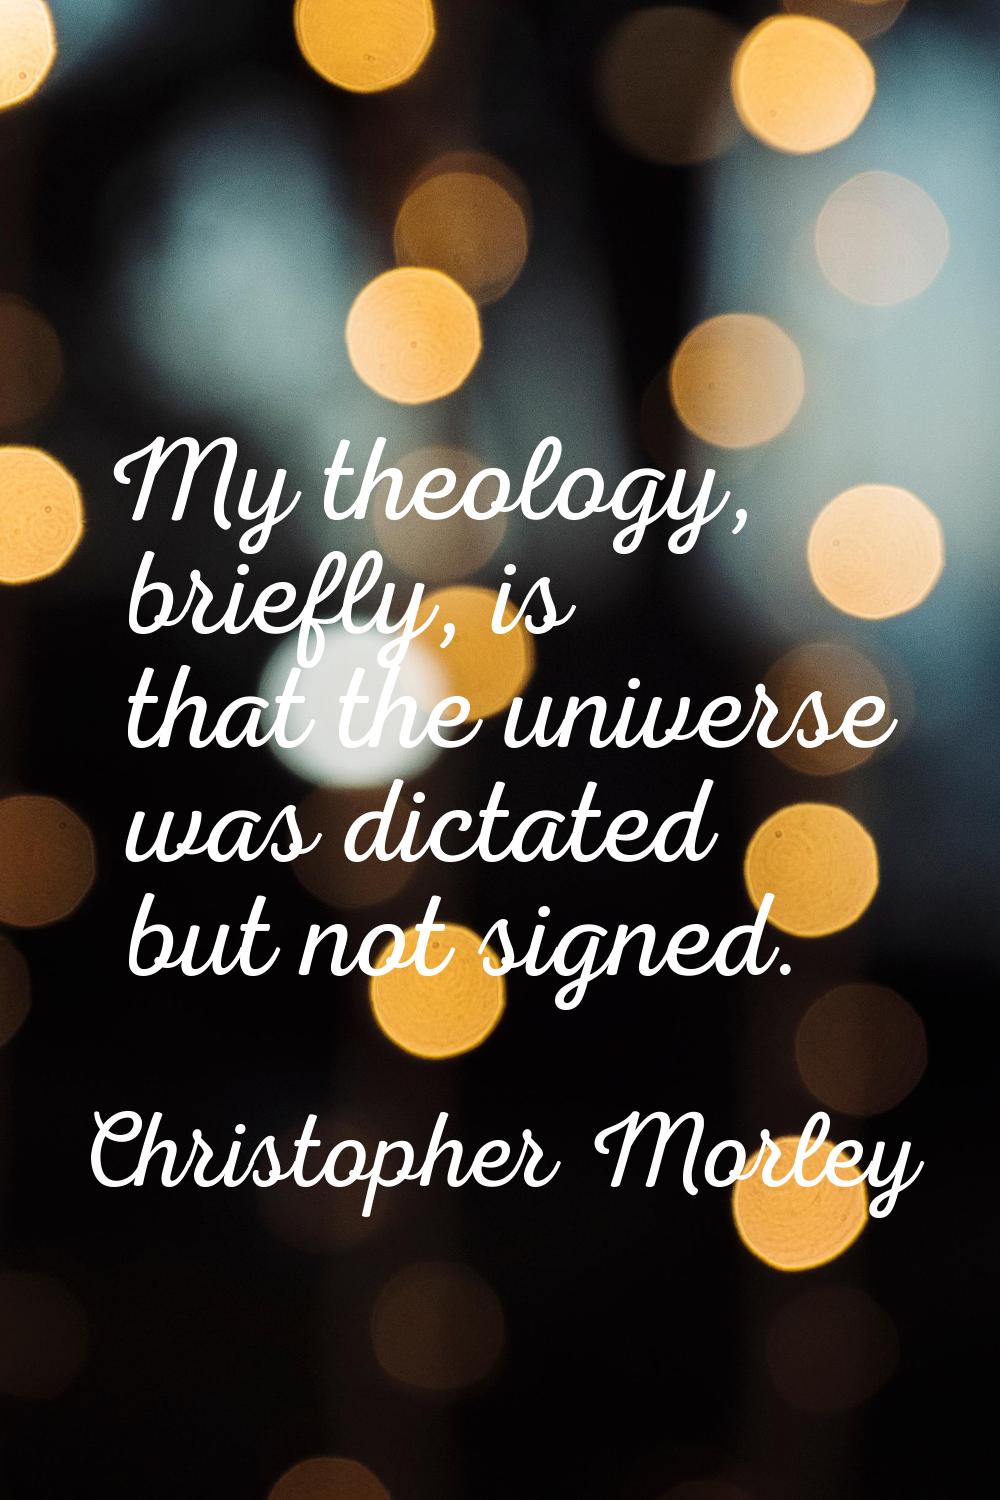 My theology, briefly, is that the universe was dictated but not signed.